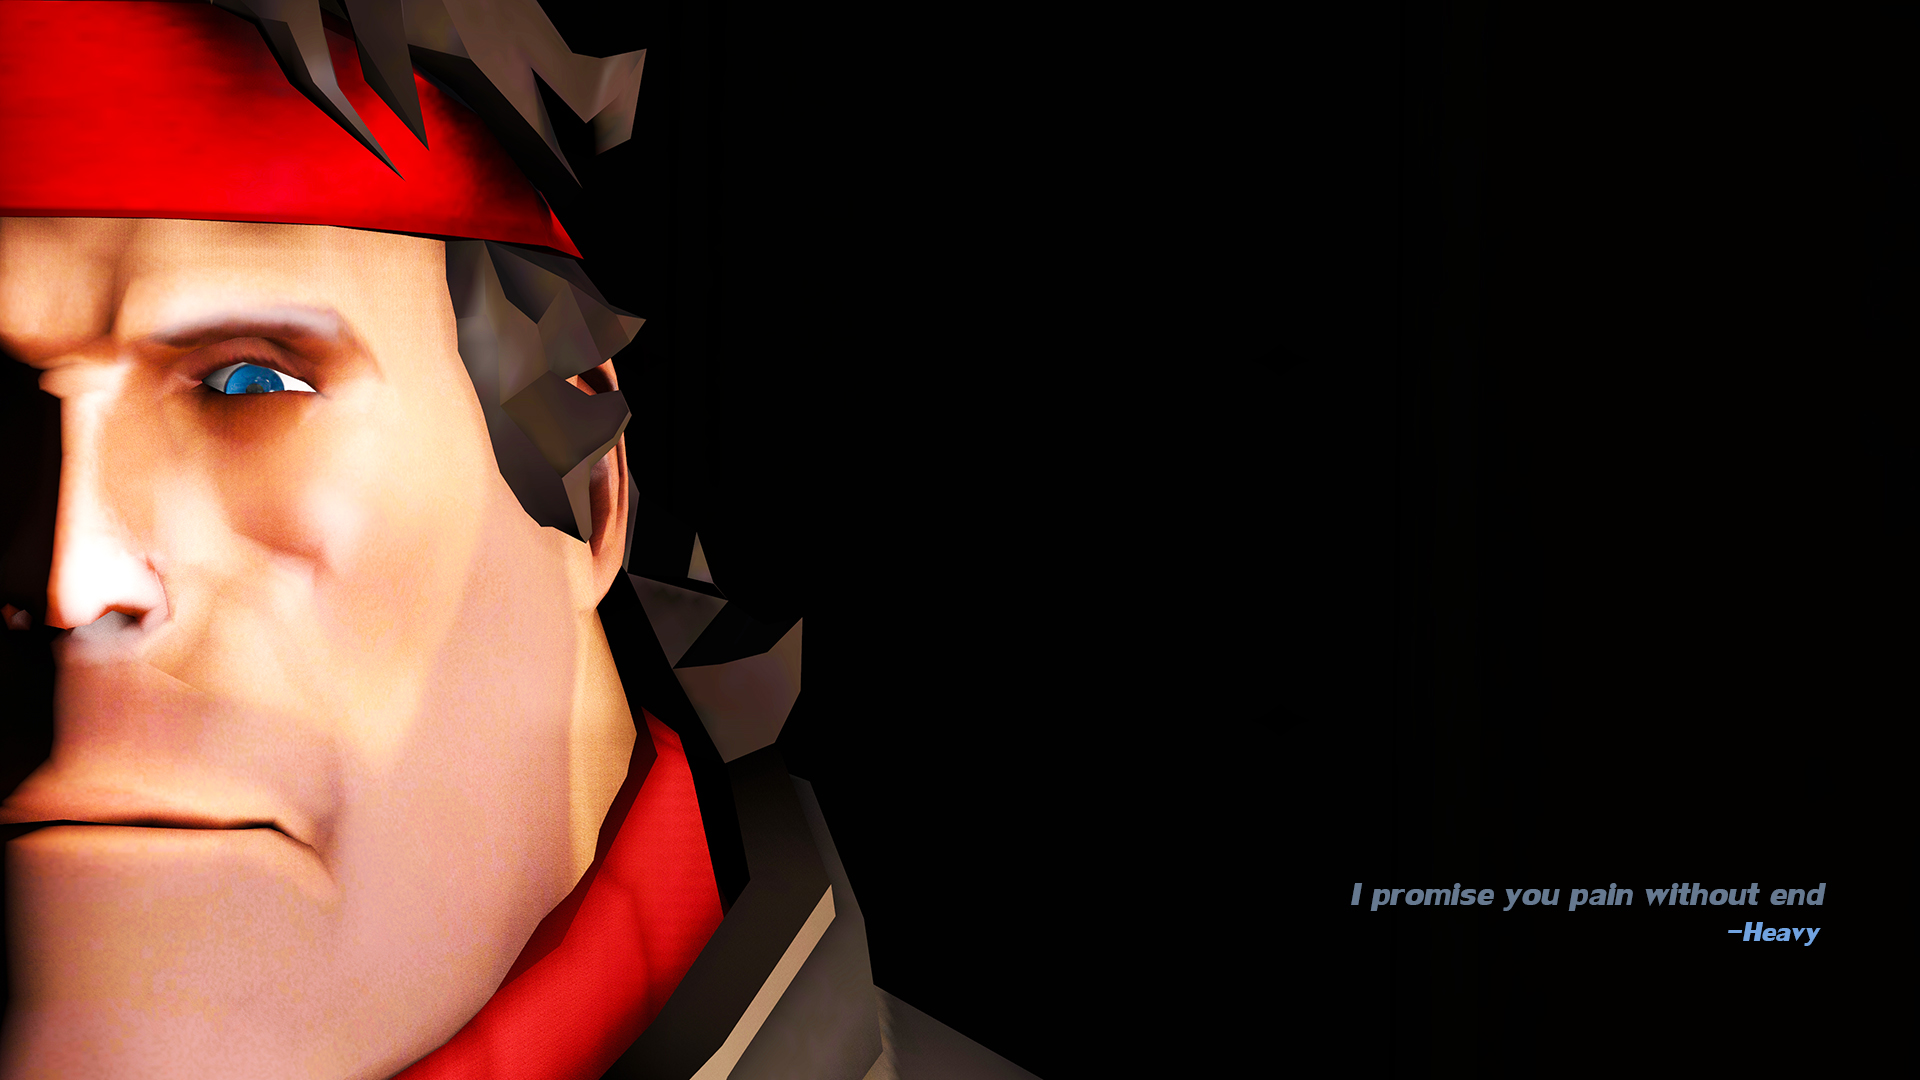 Video Game Team Fortress 2 HD Wallpaper | Background Image